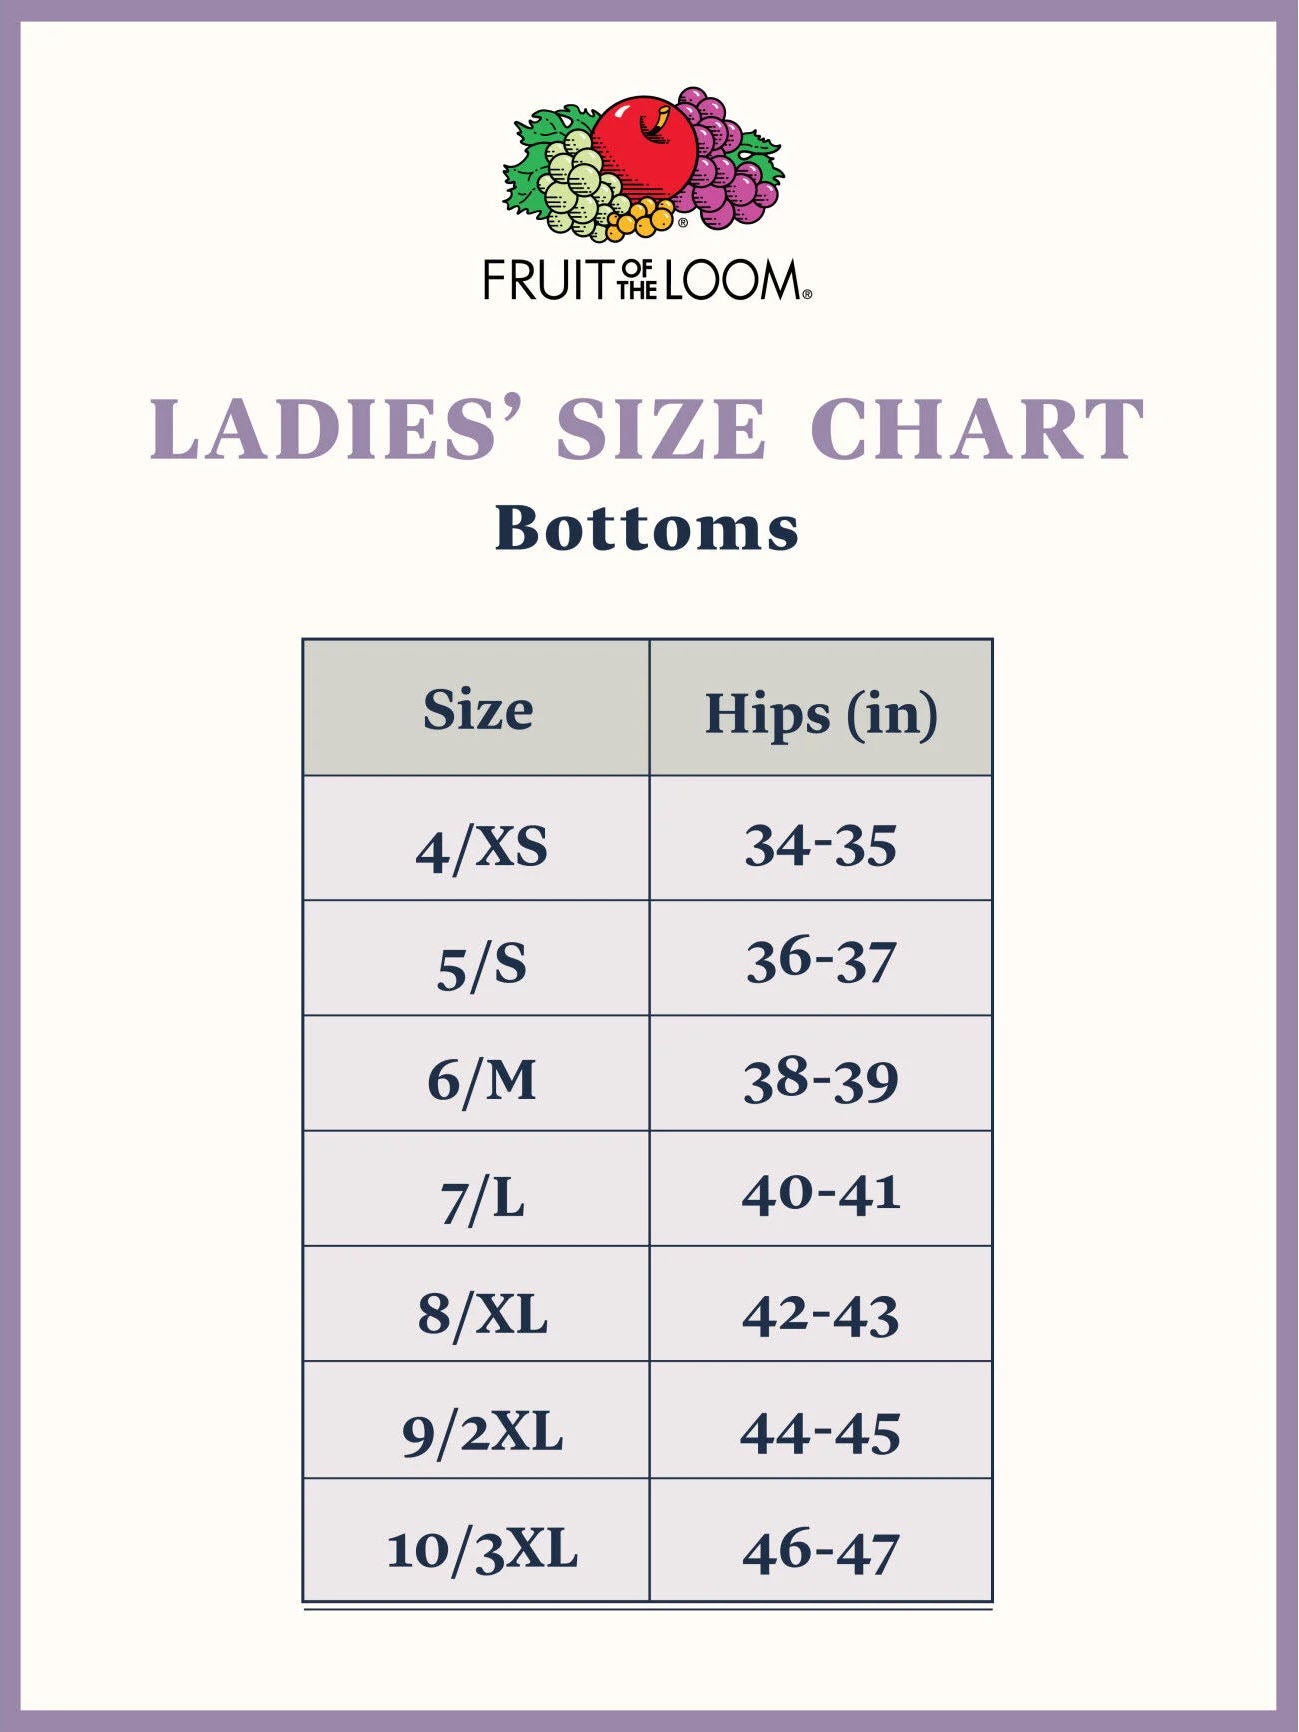 Fruit of the Loom Women's Cotton Briefs, 6-Pack, Sizes 5 - 8